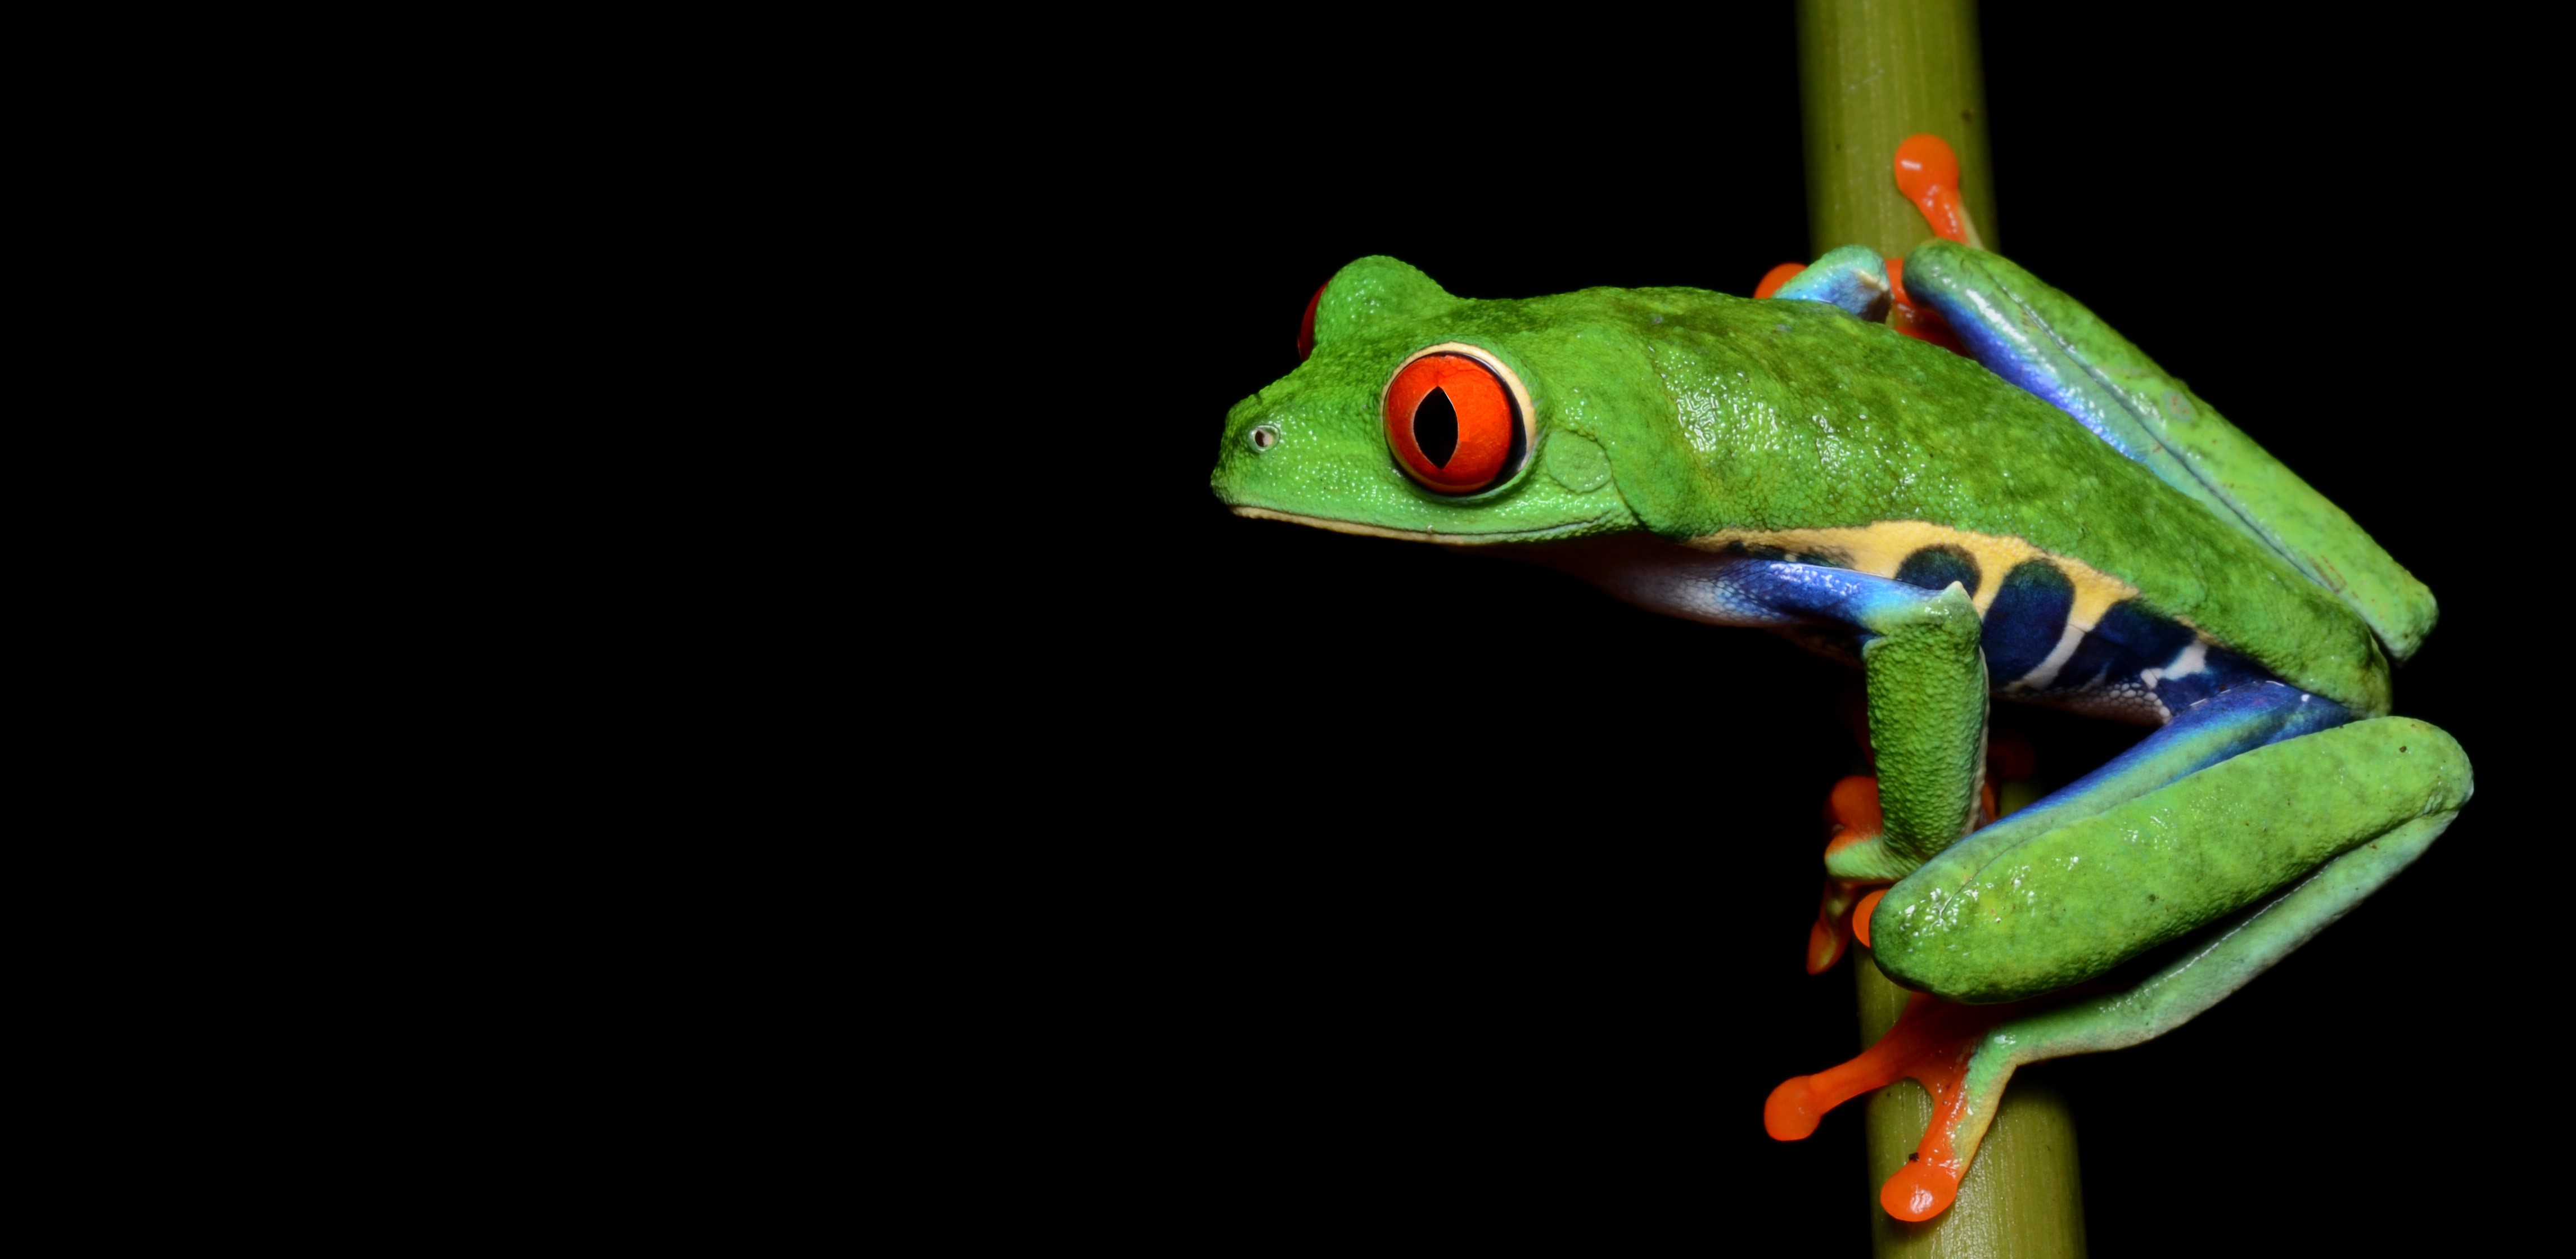 Sally Seraphin is using red-eyed tree frogs to study the effects of early childhood adversity. Credit: Geoff Gallice